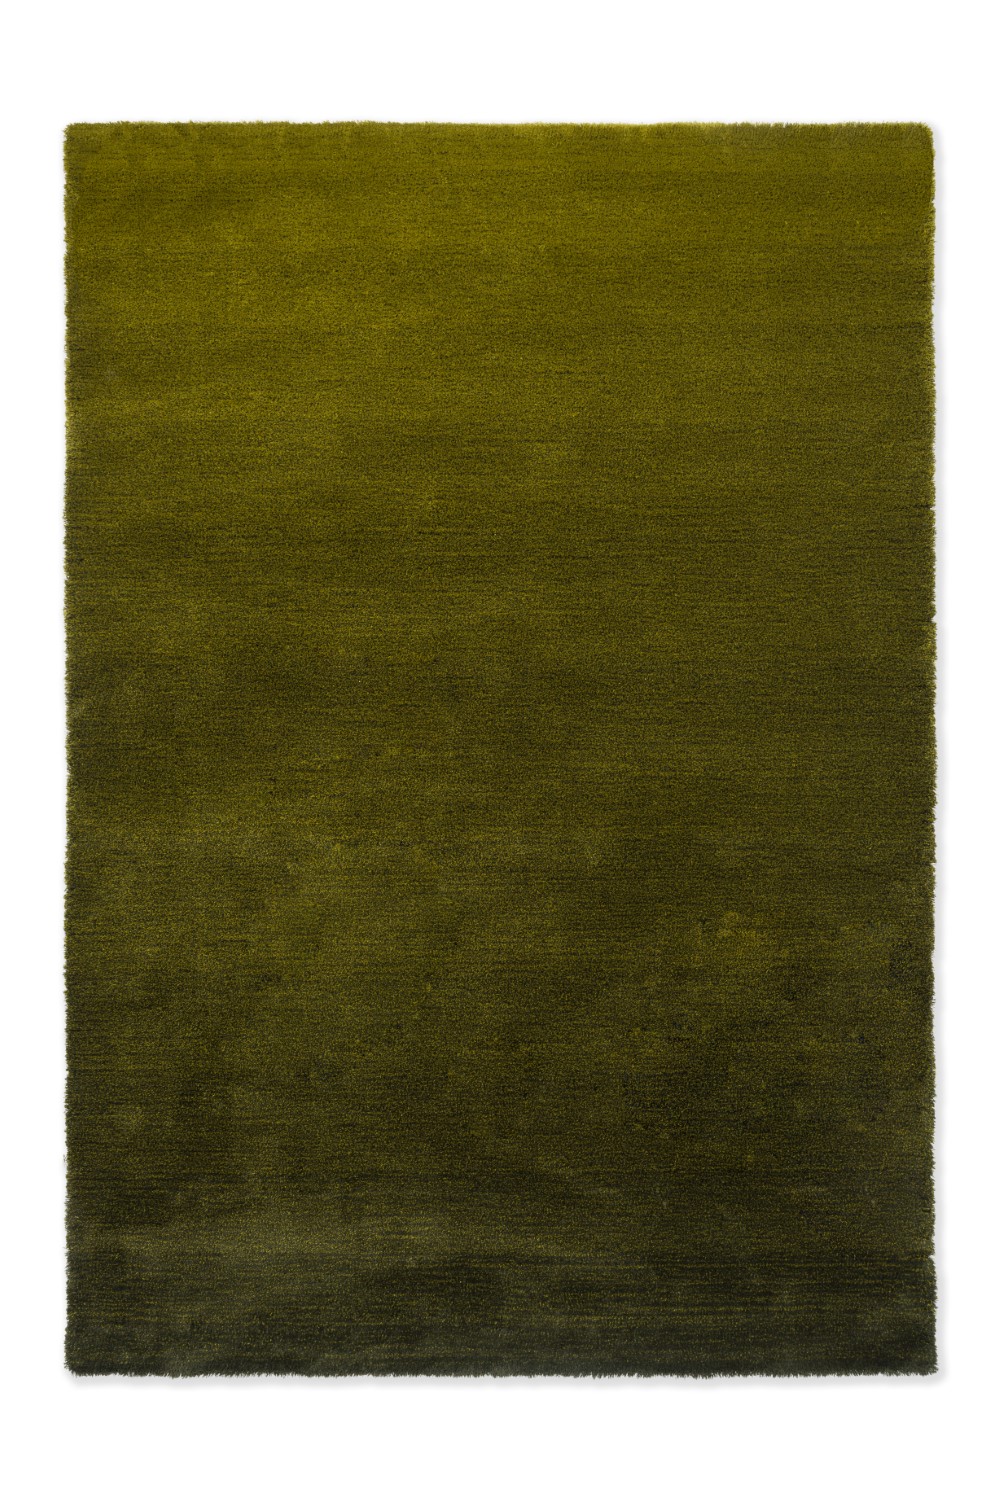 brink-campman-rug-shade-low-olive-deep-forest-010107